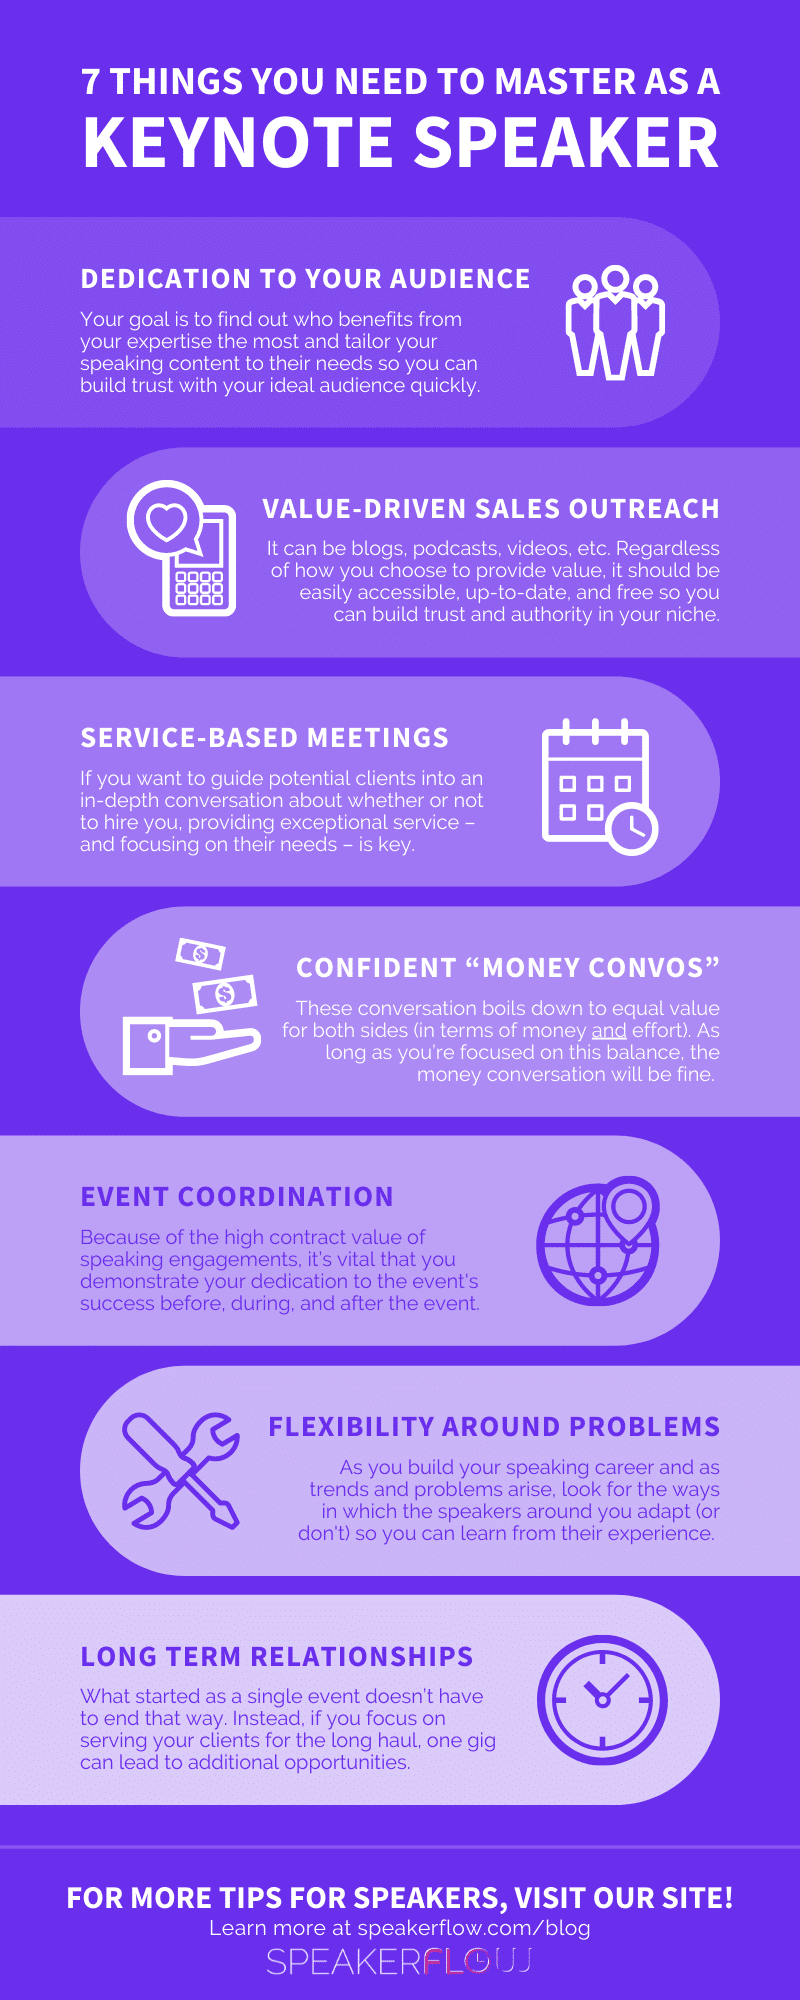 How To Find The Perfect Speaker for Your Event - Attendease